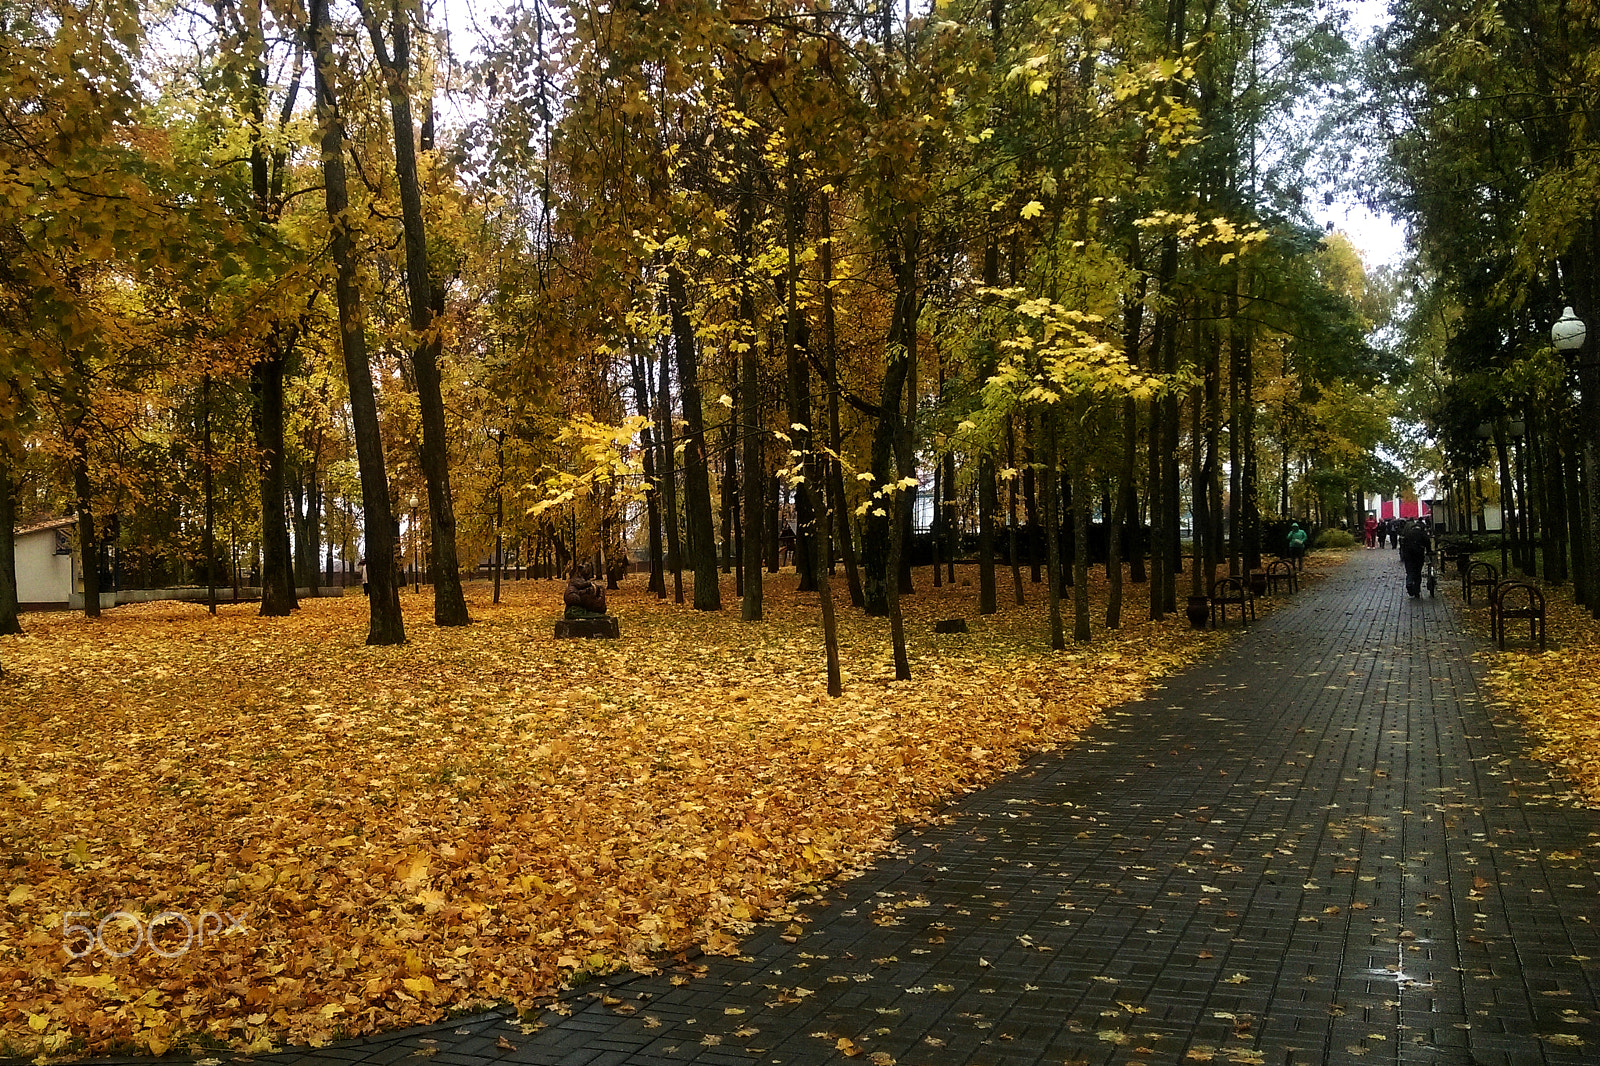 HTC DESIRE 826 DUAL SIM sample photo. The beginning of autumn in the park, many fallen leaves on the ground photography